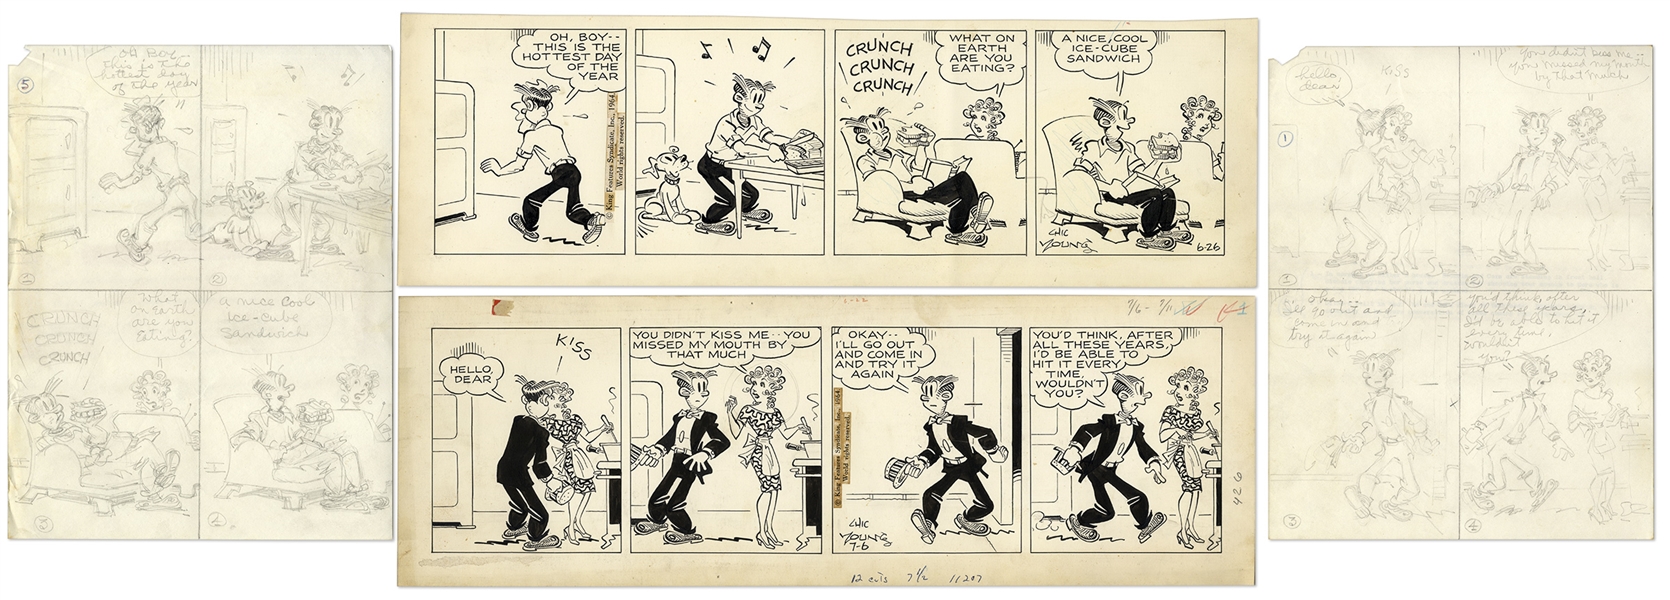 2 Chic Young Hand-Drawn ''Blondie'' Comic Strips From 1964 -- With Chic Young's Original Preliminary Artwork for Both Strips